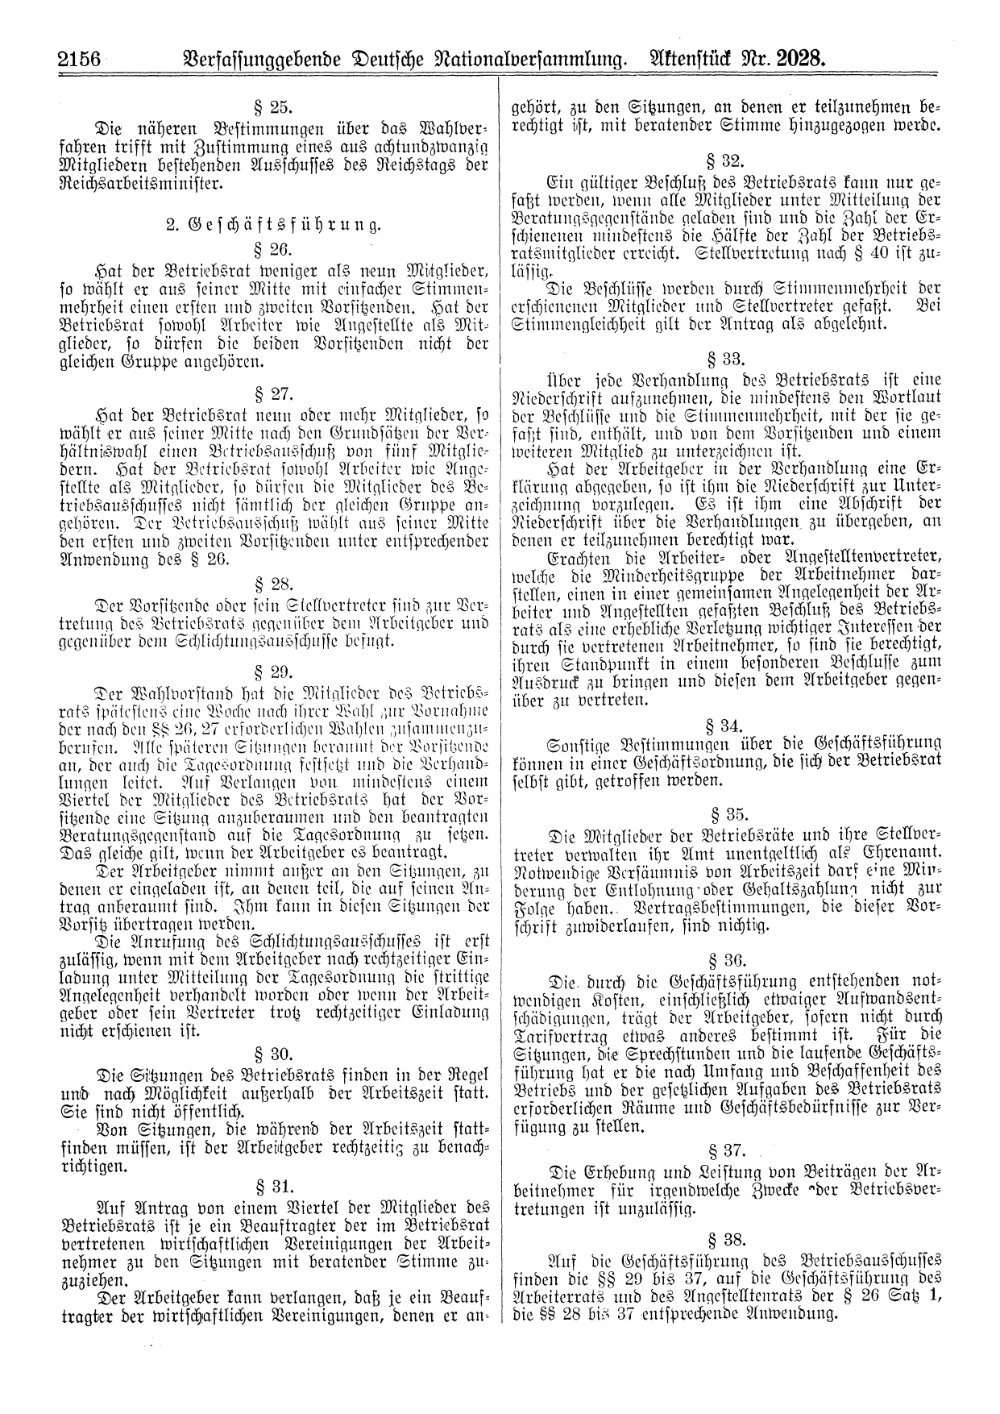 Scan of page 2156